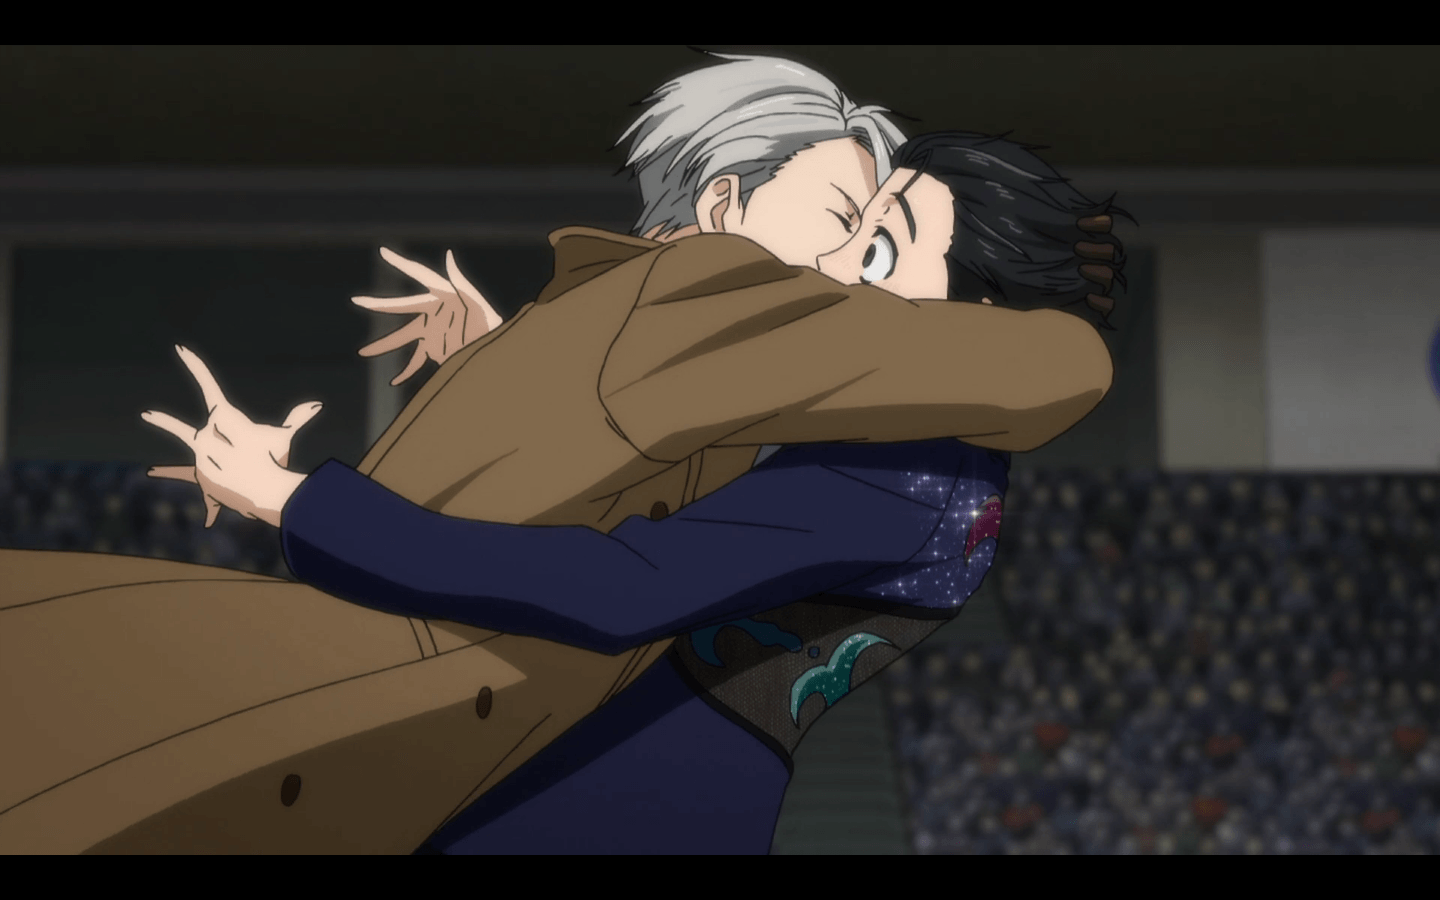 Kiss Obscured On Ice Is Gay, HD Wallpaper & background